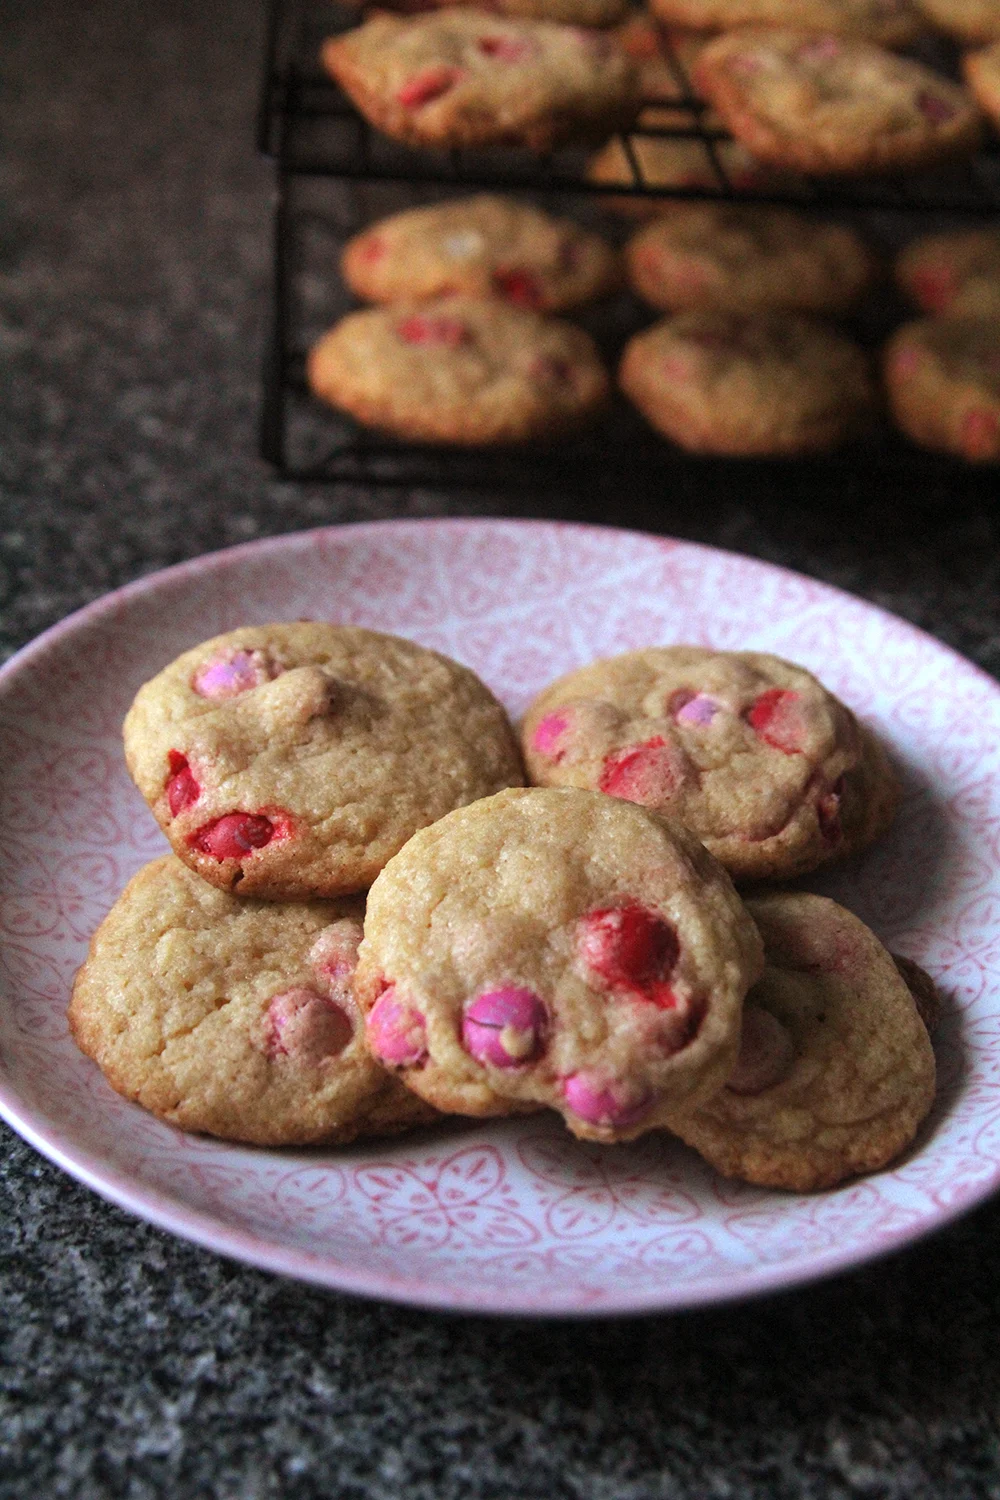 A pink and white plate on a granite countertop shows a pile of M&M cookies for Valentine's Day dotted with red and pink candies. A cooling rack with cookies sits in the background.